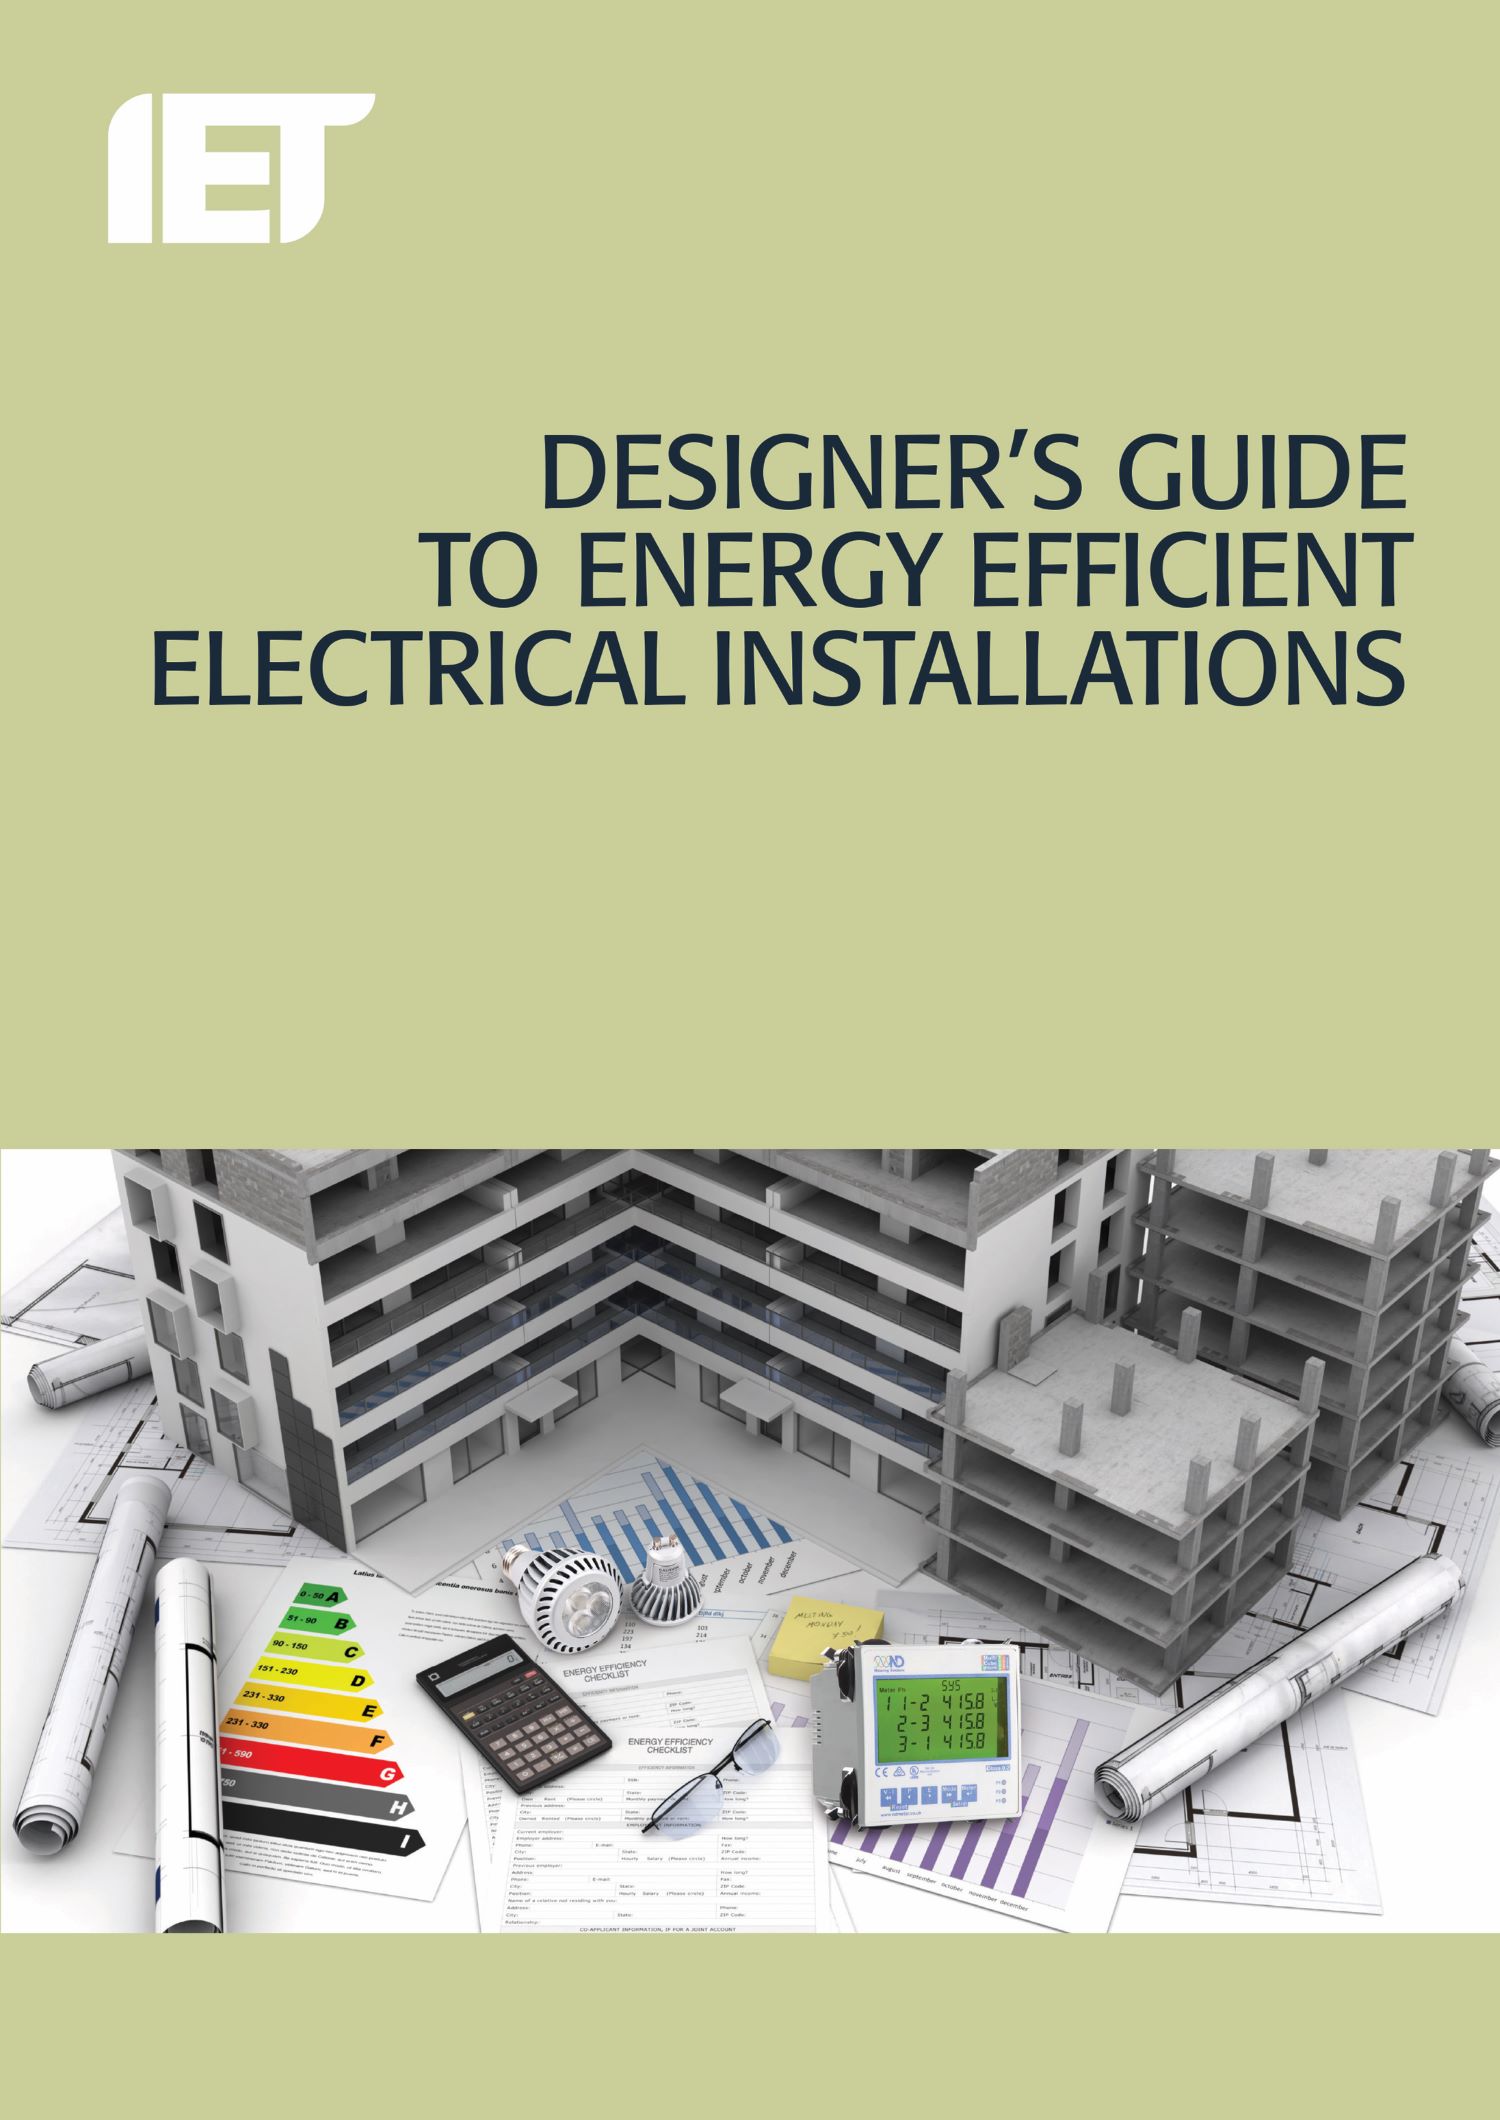 Designer's Guide to Energy Efficient Electrical Installations